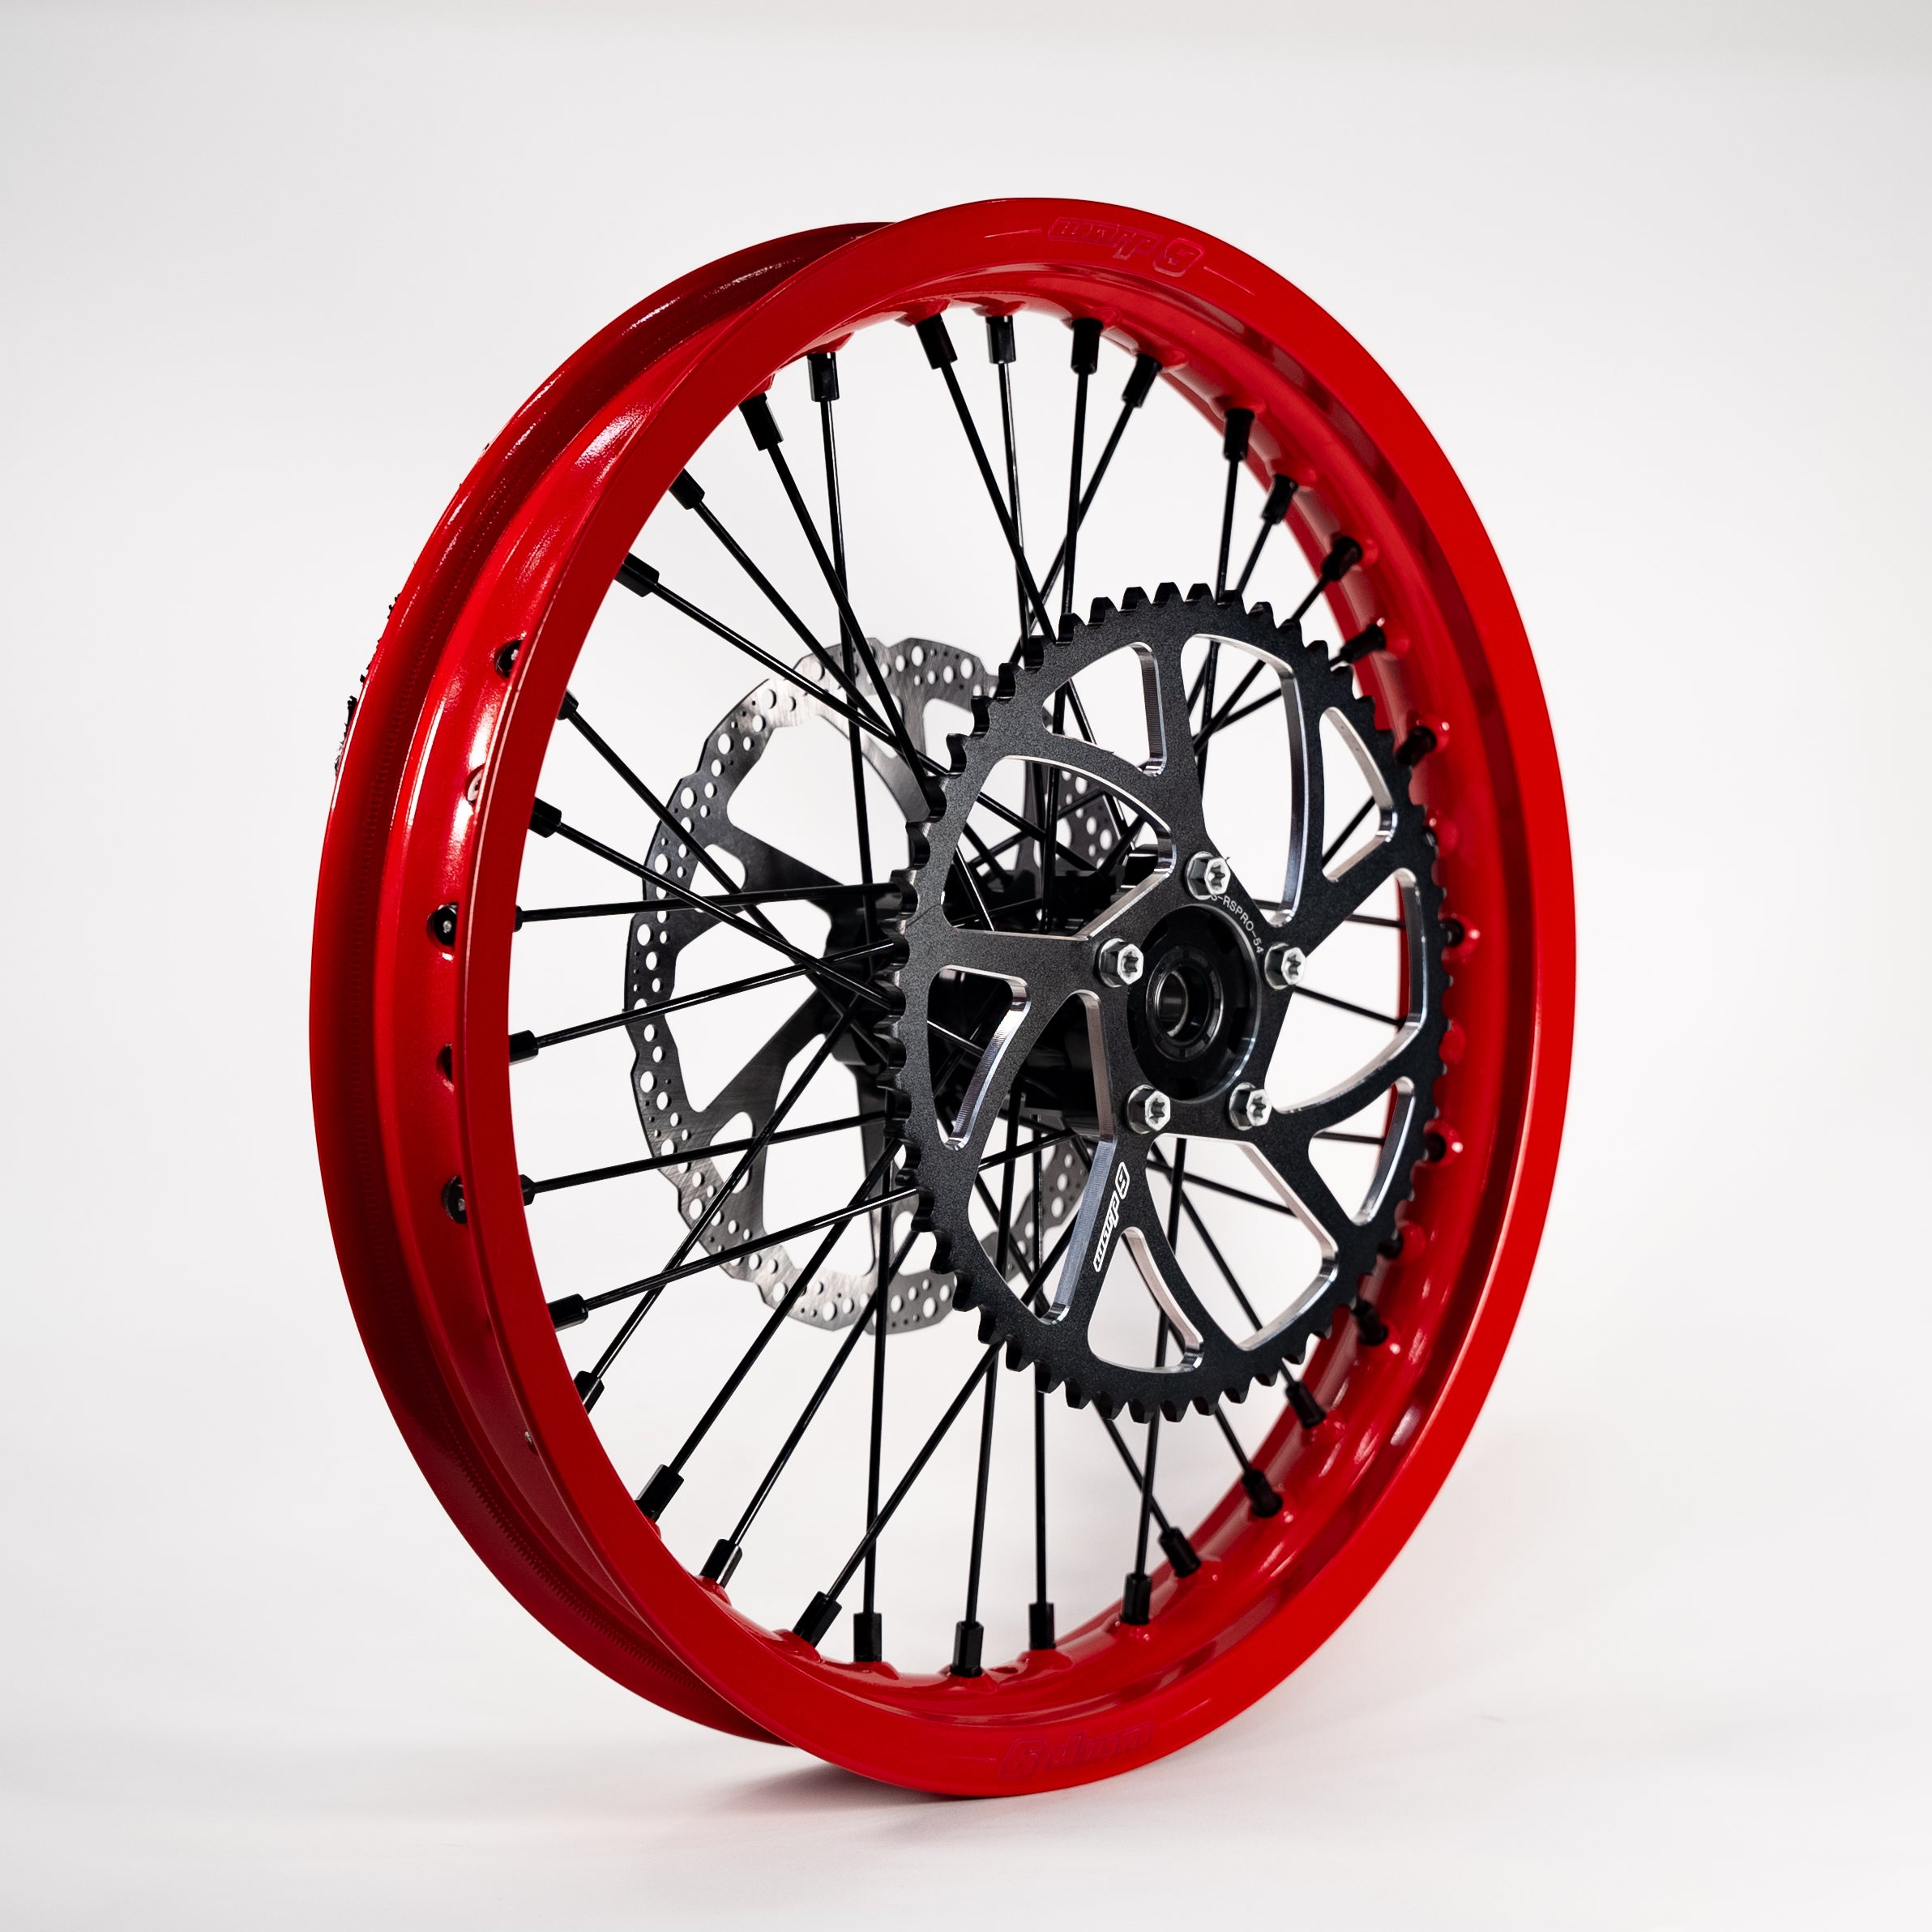 Powder Coated (painted) 16/19" Complete Wheel & Tire Combo - Warp 9